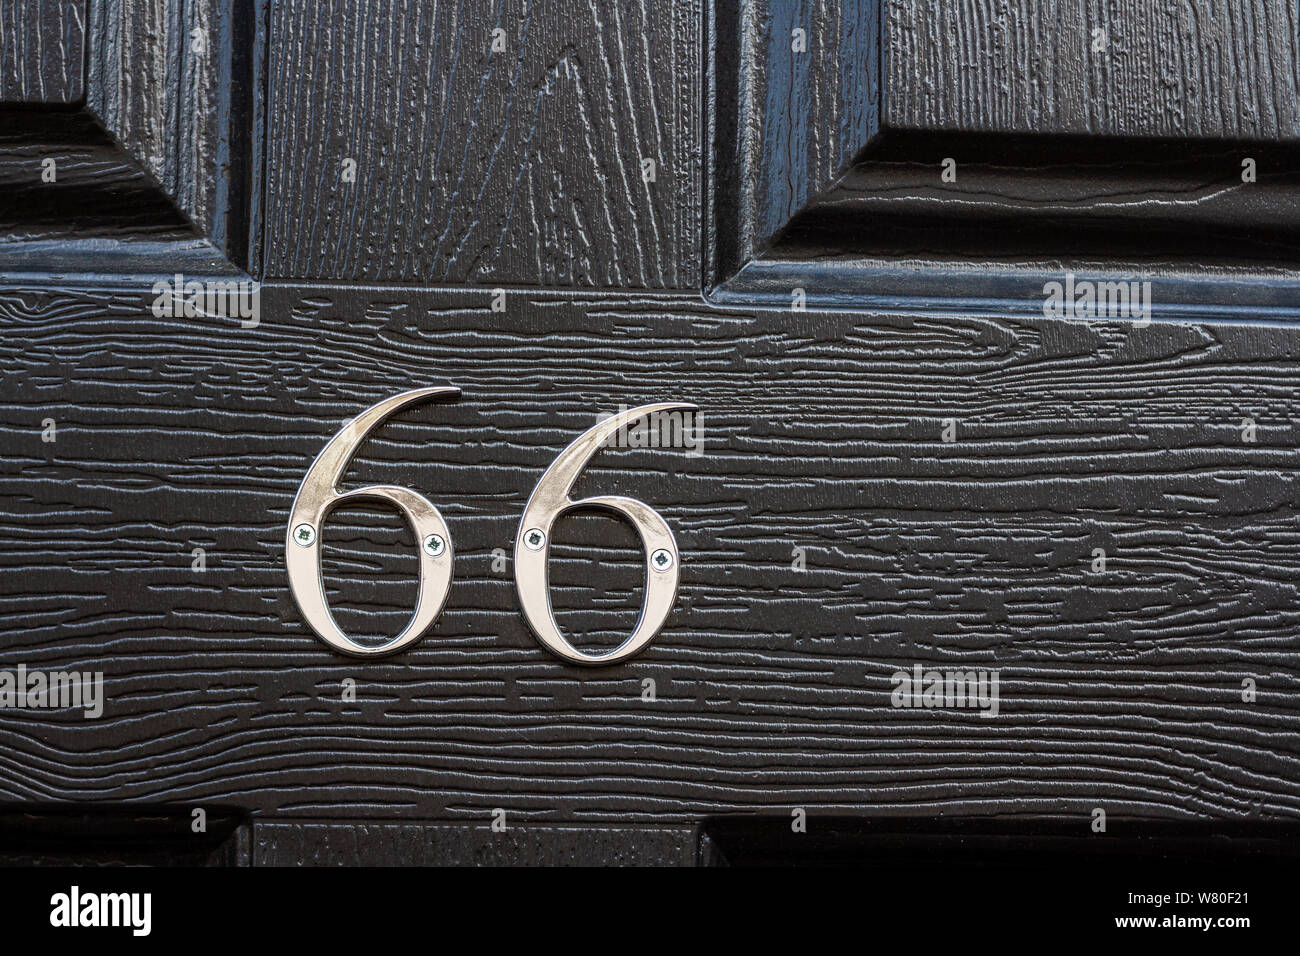 House number 66 on a shiny black door Stock Photo